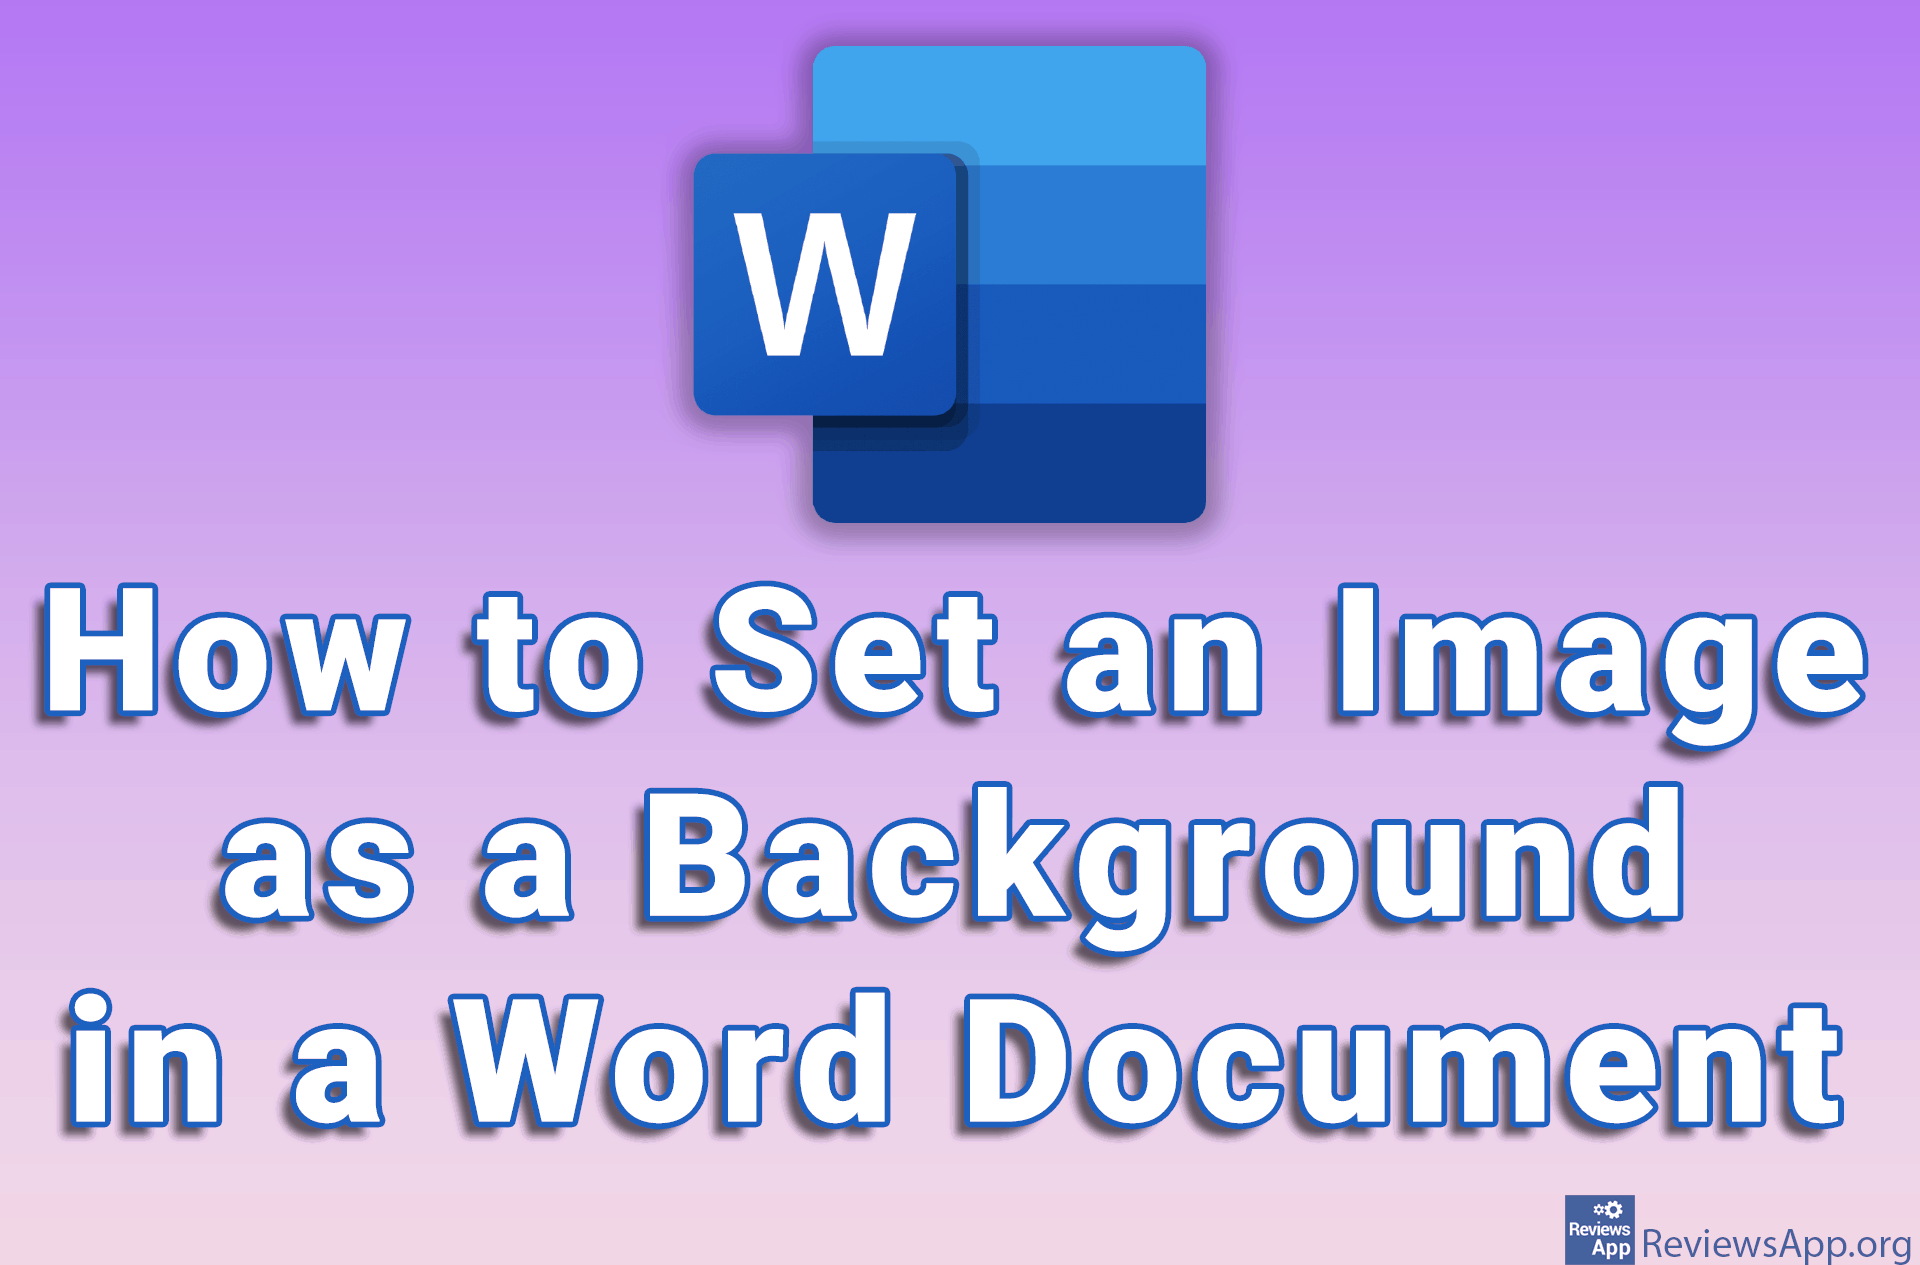 how-to-set-an-image-as-a-background-in-a-word-document-reviews-app